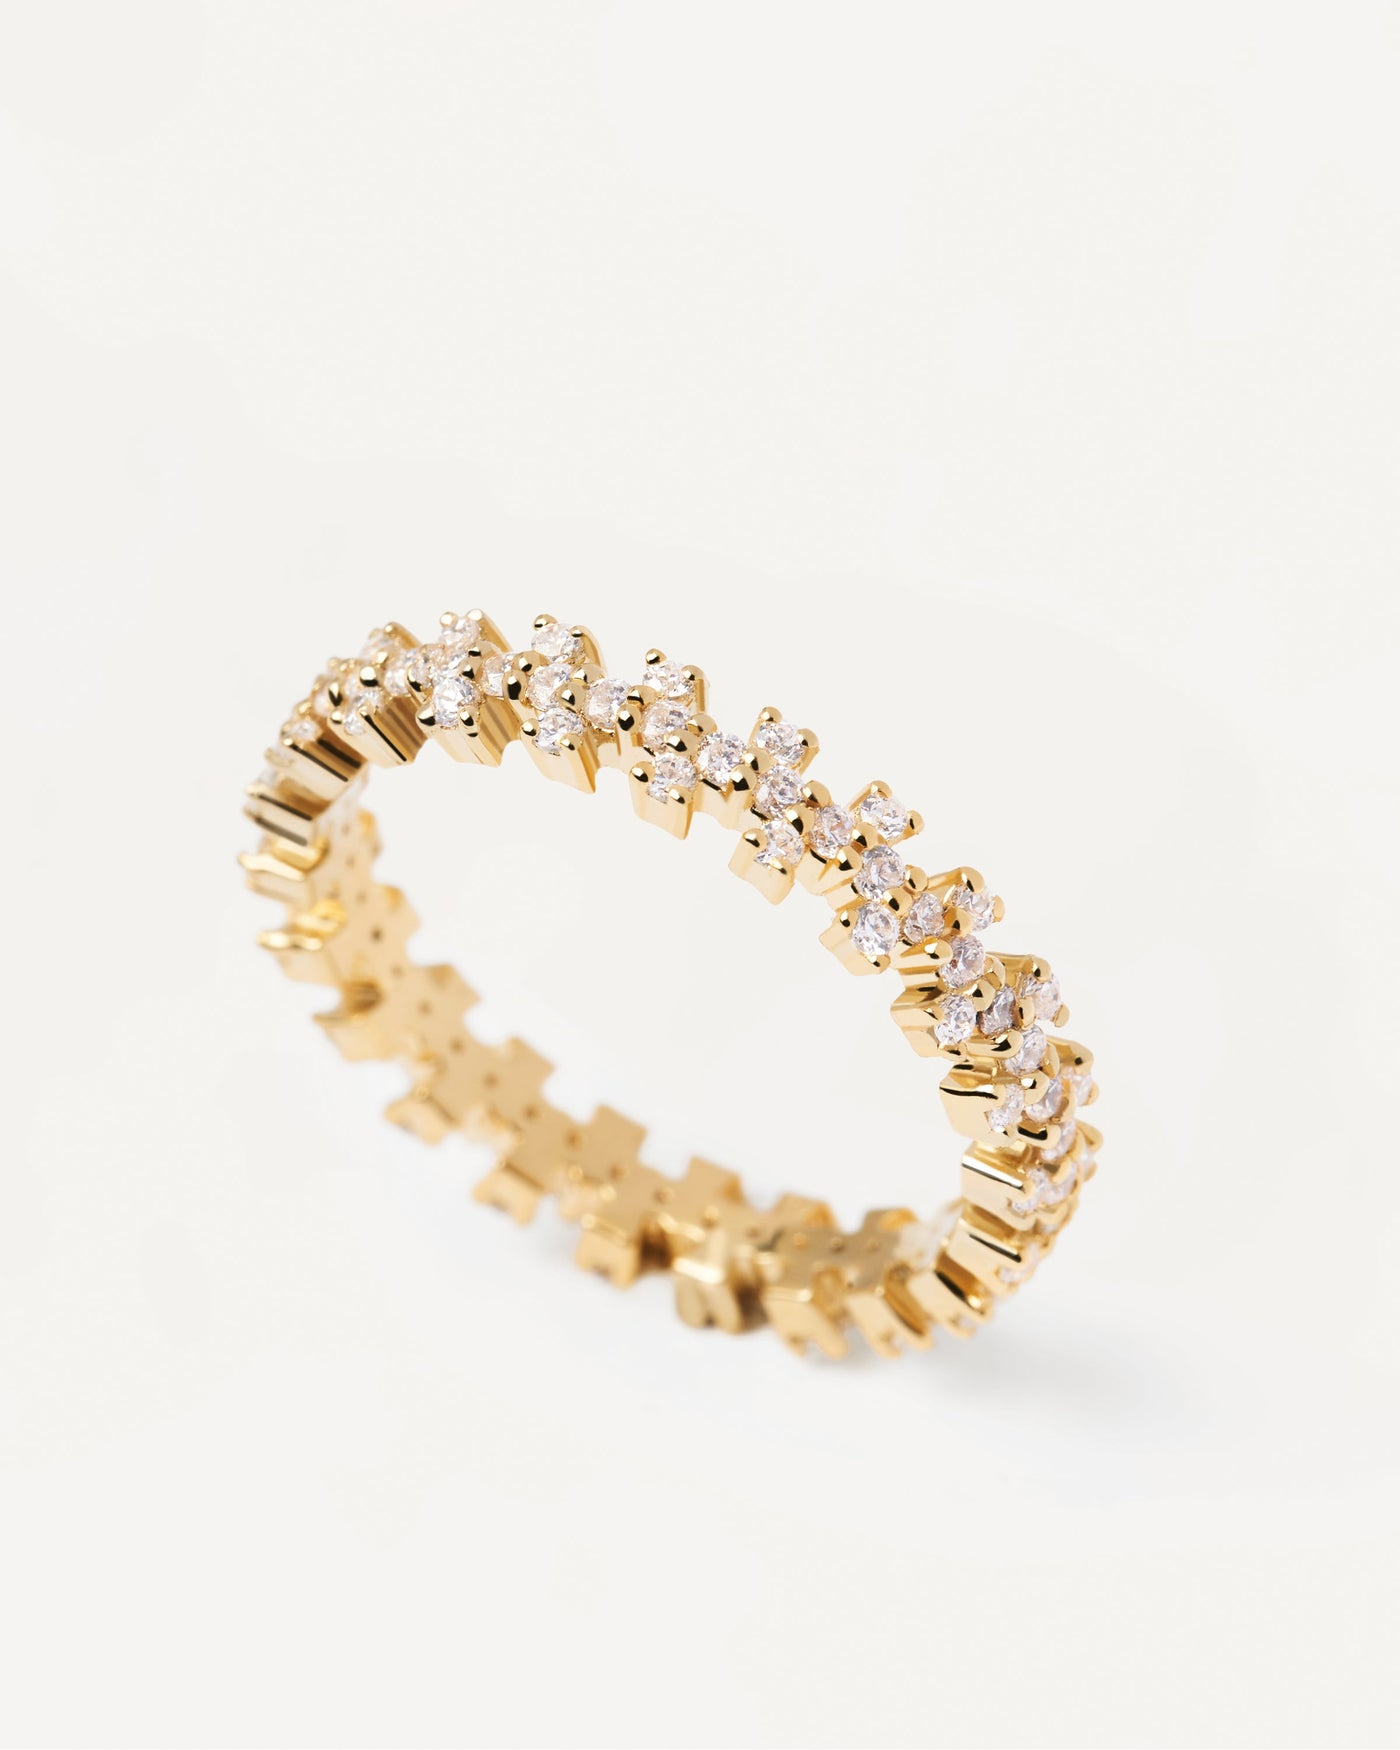 2023 Selection | Crown Ring. Gold-plated eternity ring with crown shape. Get the latest arrival from PDPAOLA. Place your order safely and get this Best Seller. Free Shipping.